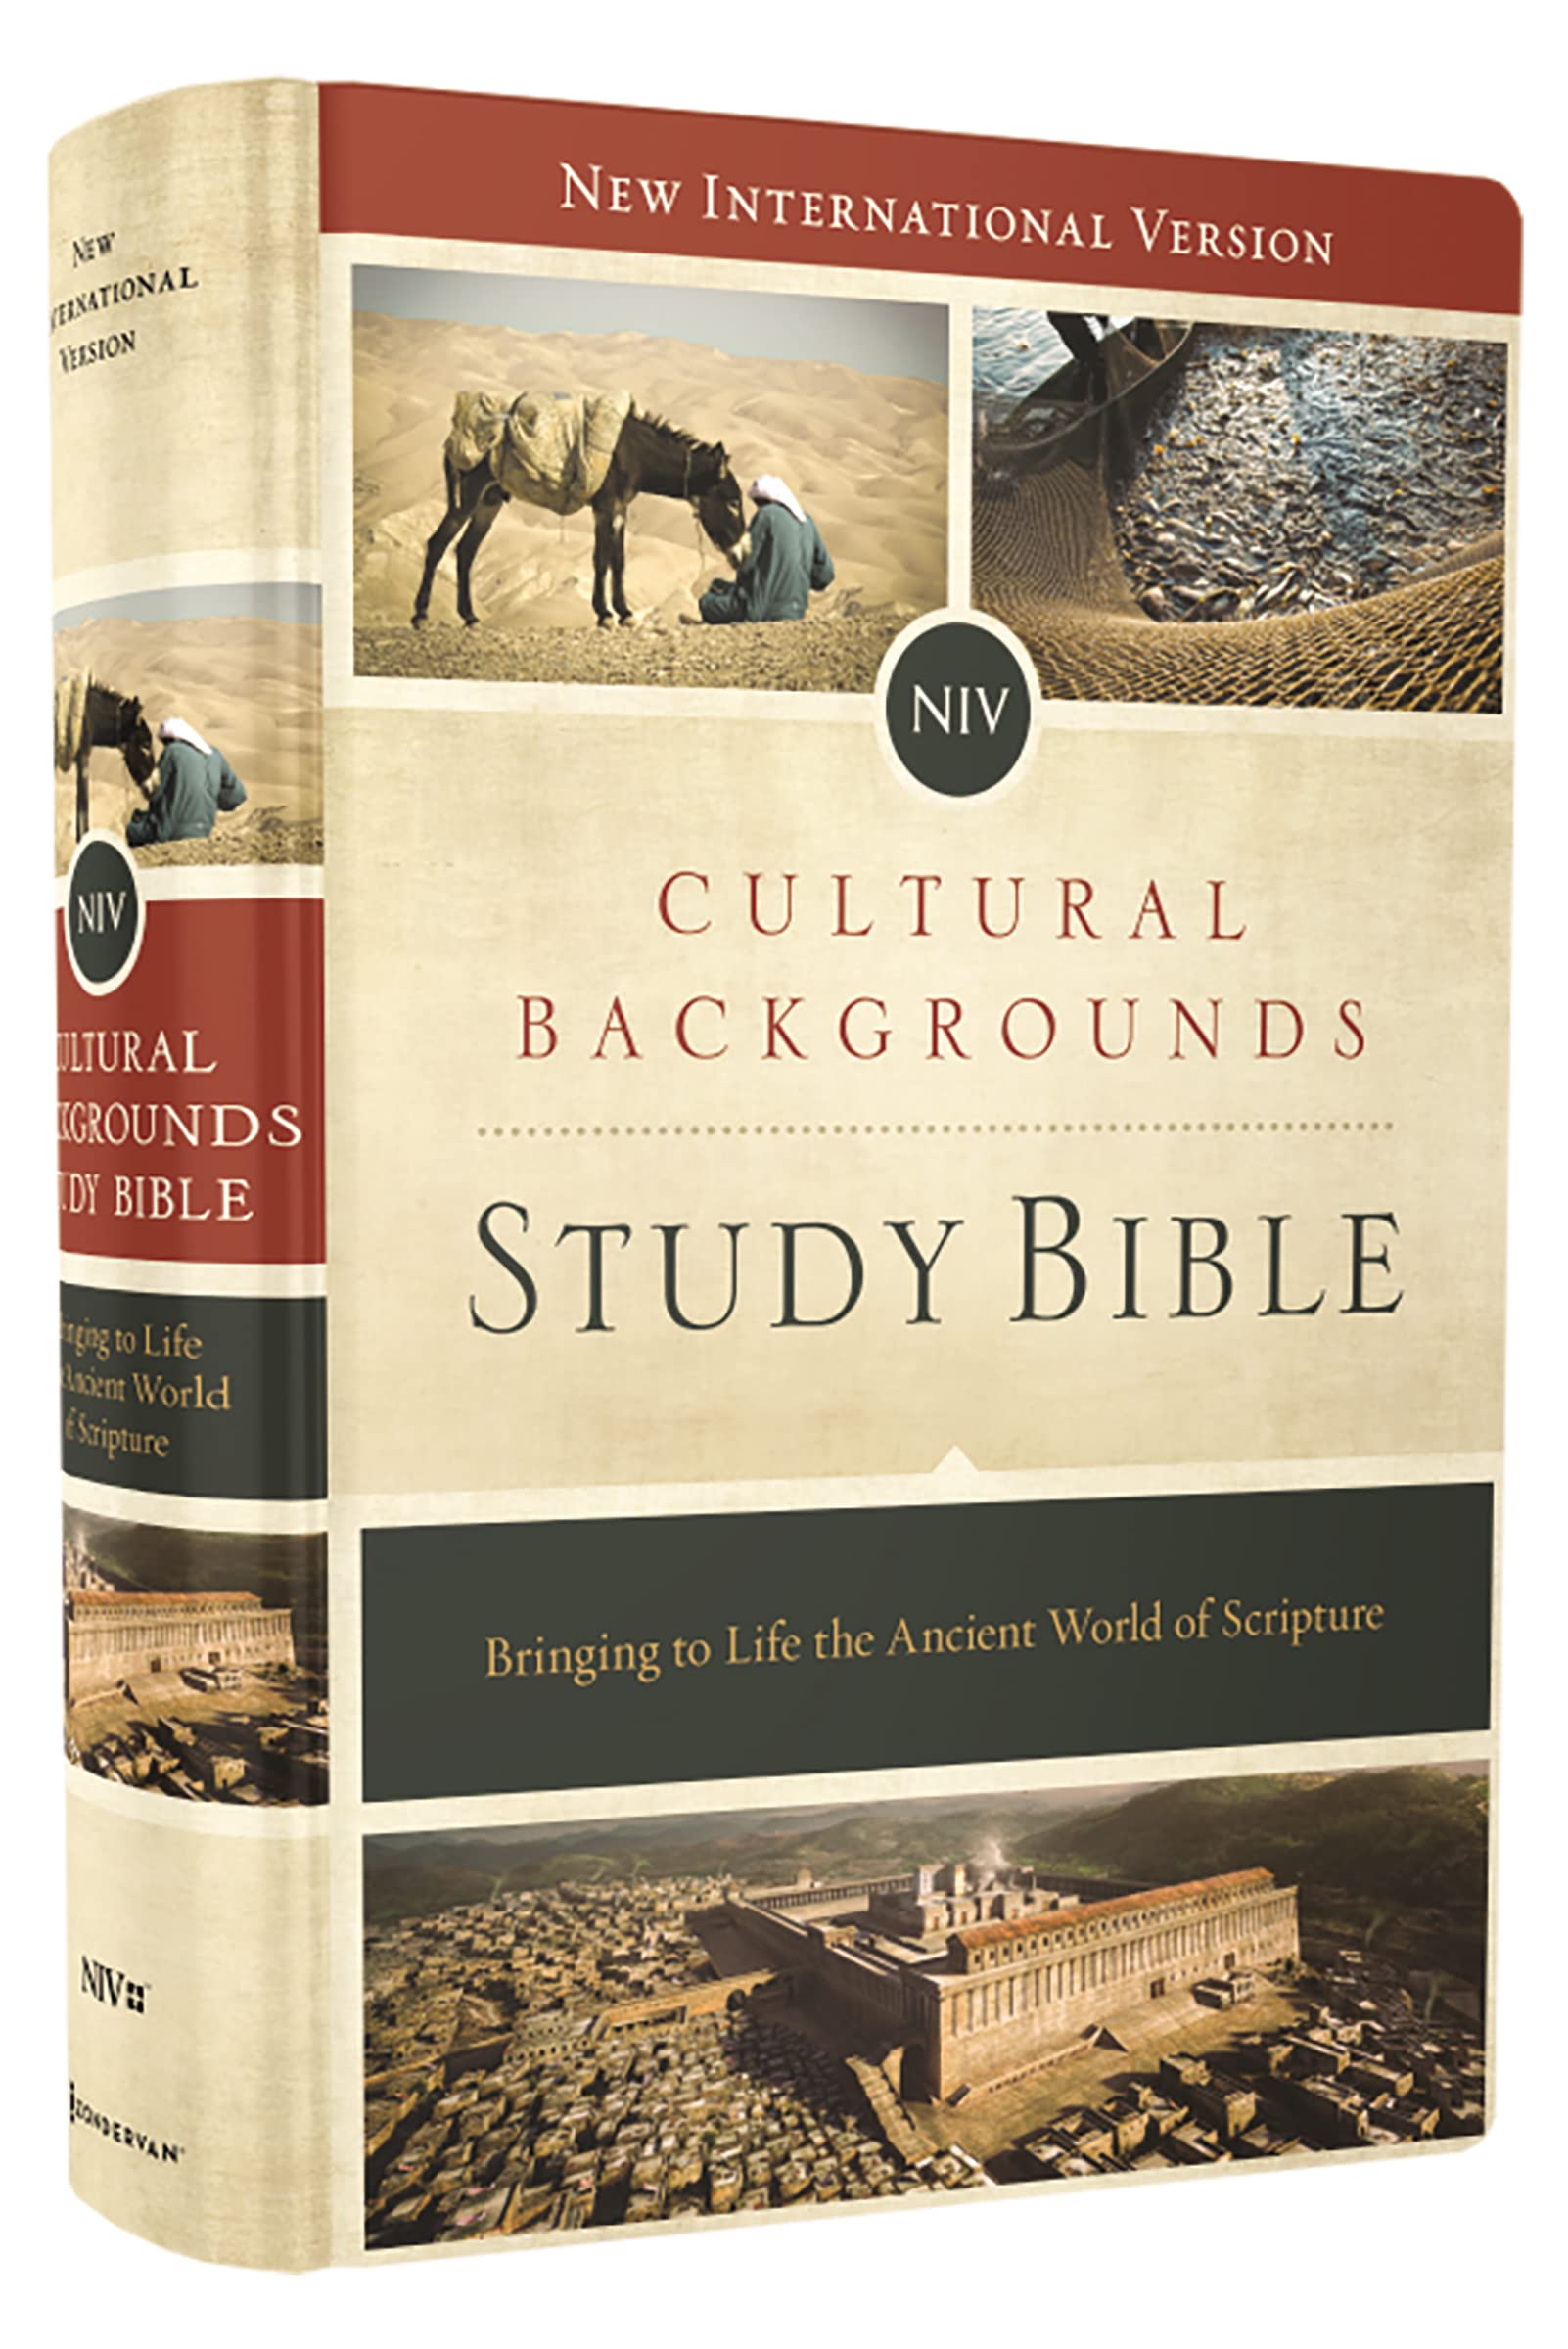 Cultural Backgrounds Study Bible-NIV: Bringing to Life the Ancient World of Scripture by Keener, Craig S.